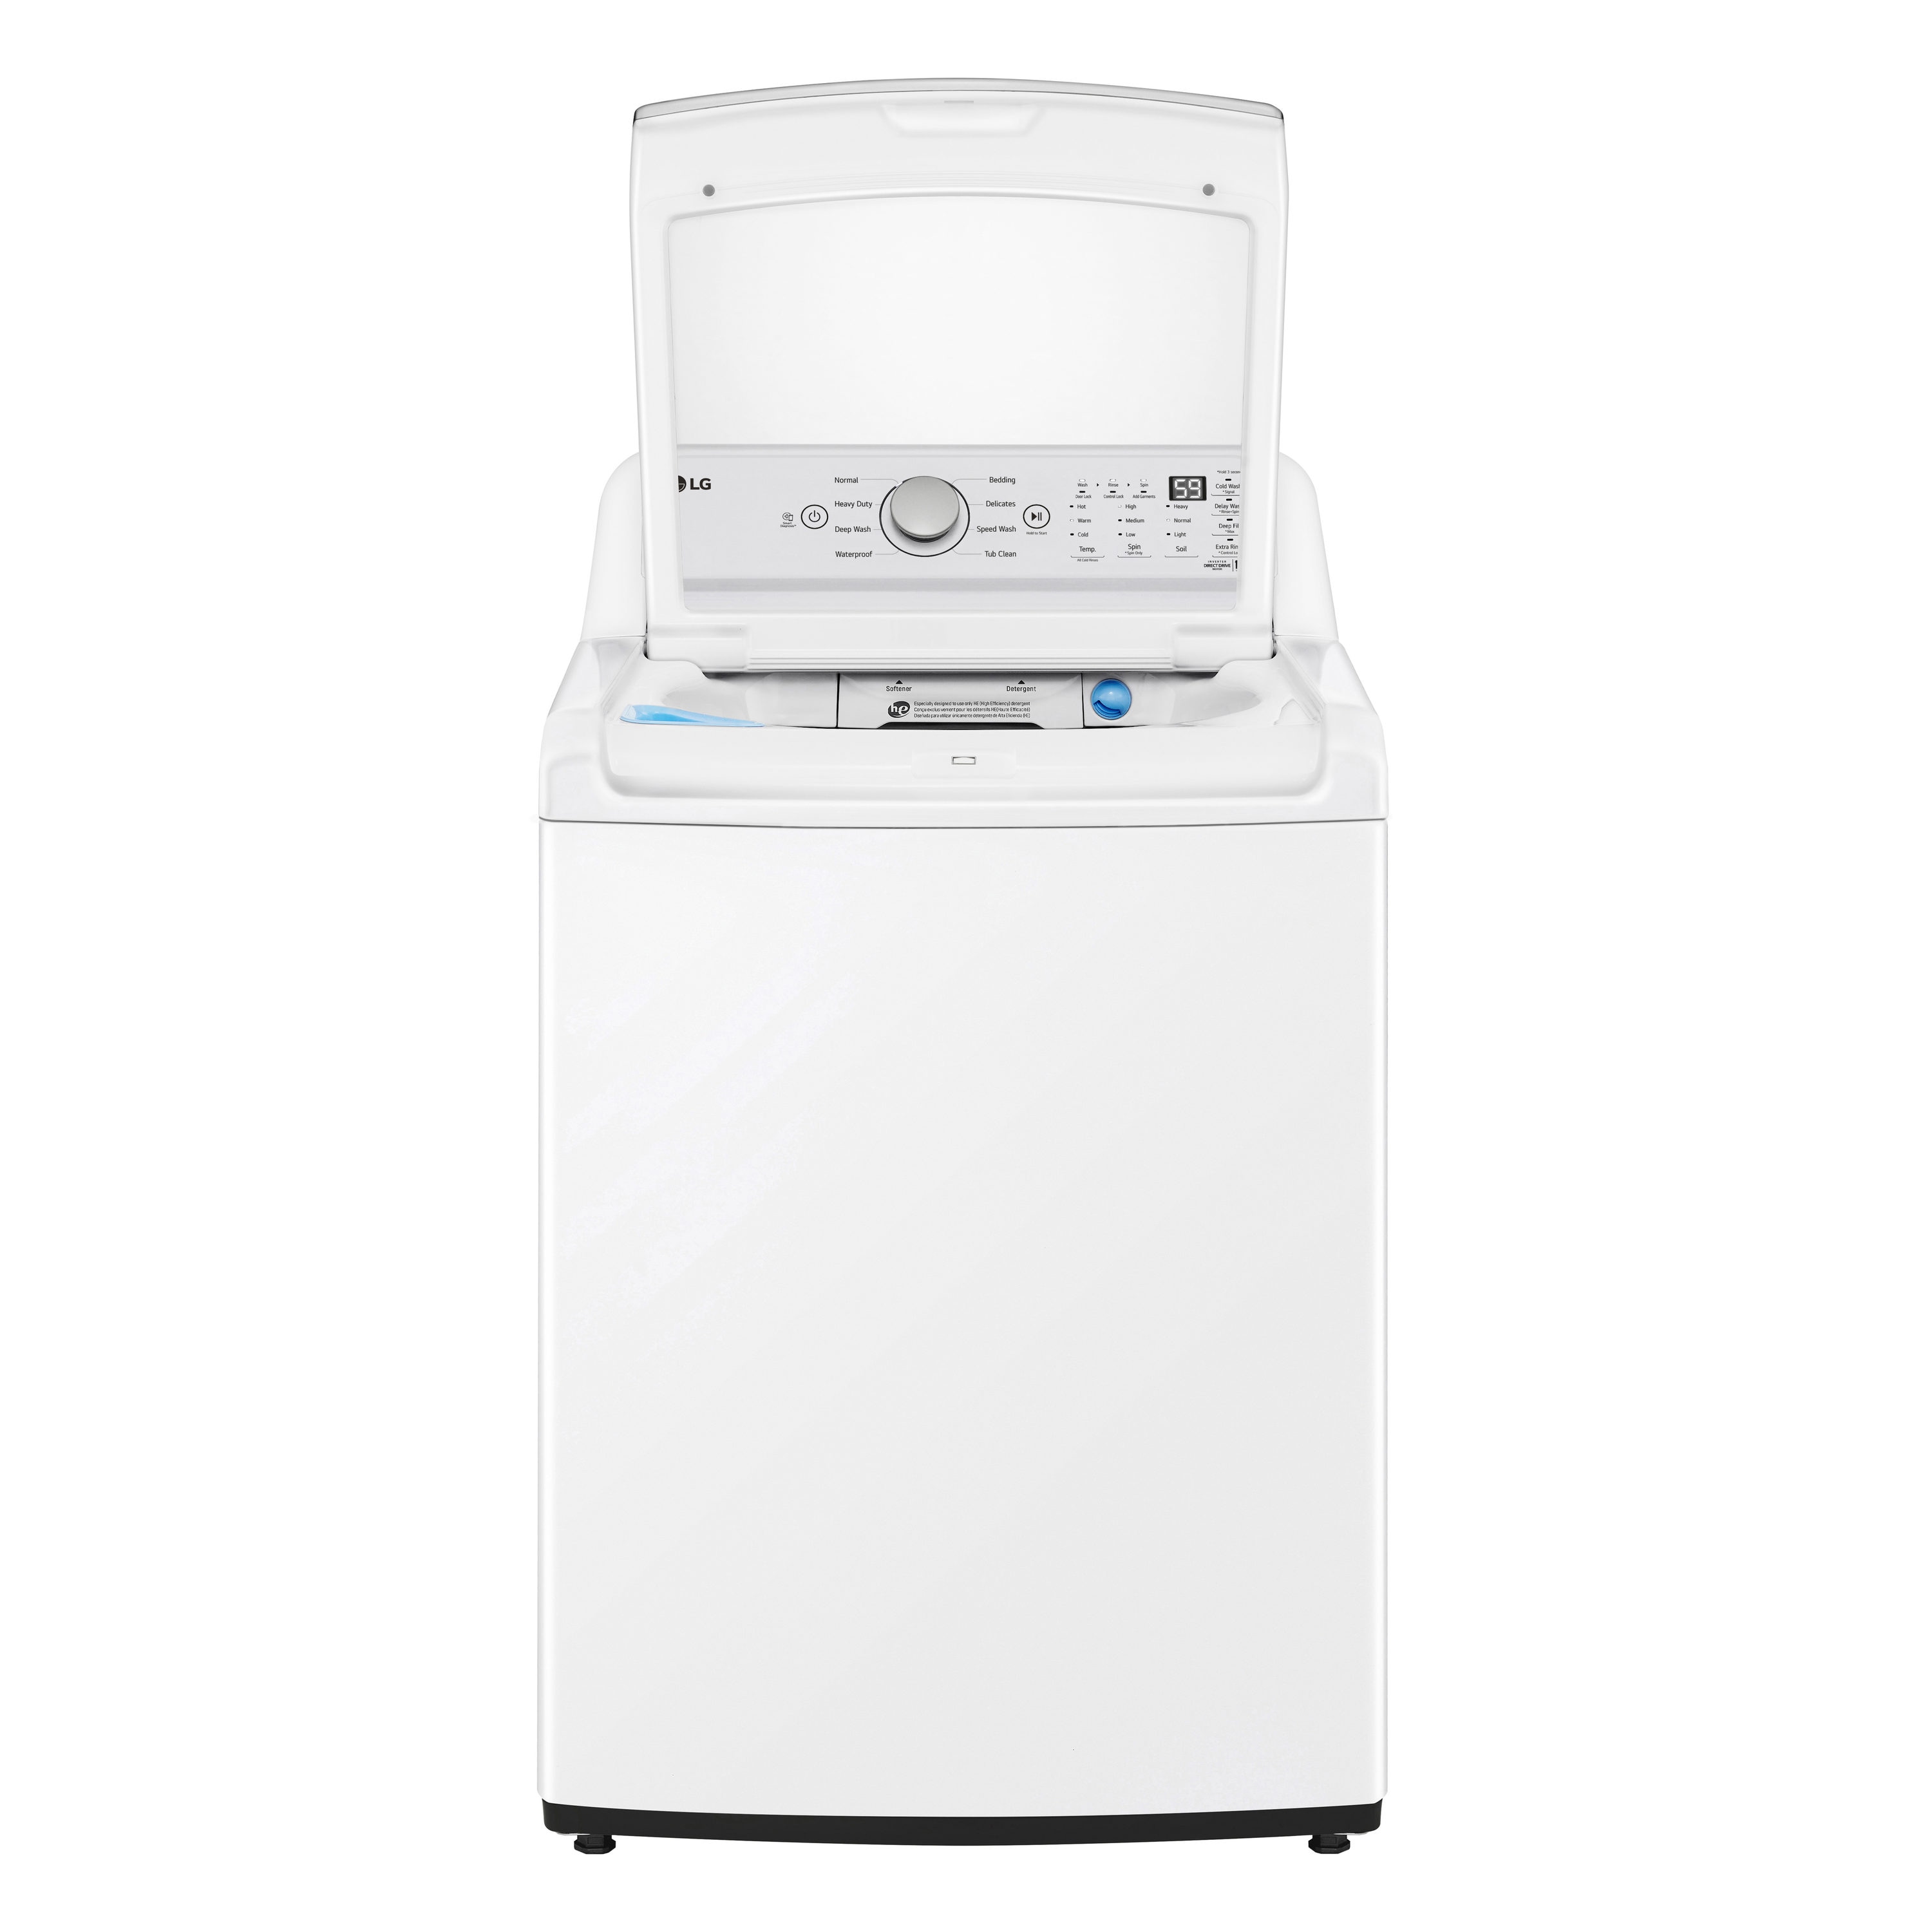 LG 4.8 cu. ft. Mega Capacity Top Load Washer with 4-Way Agitator and  TurboDrum Technology